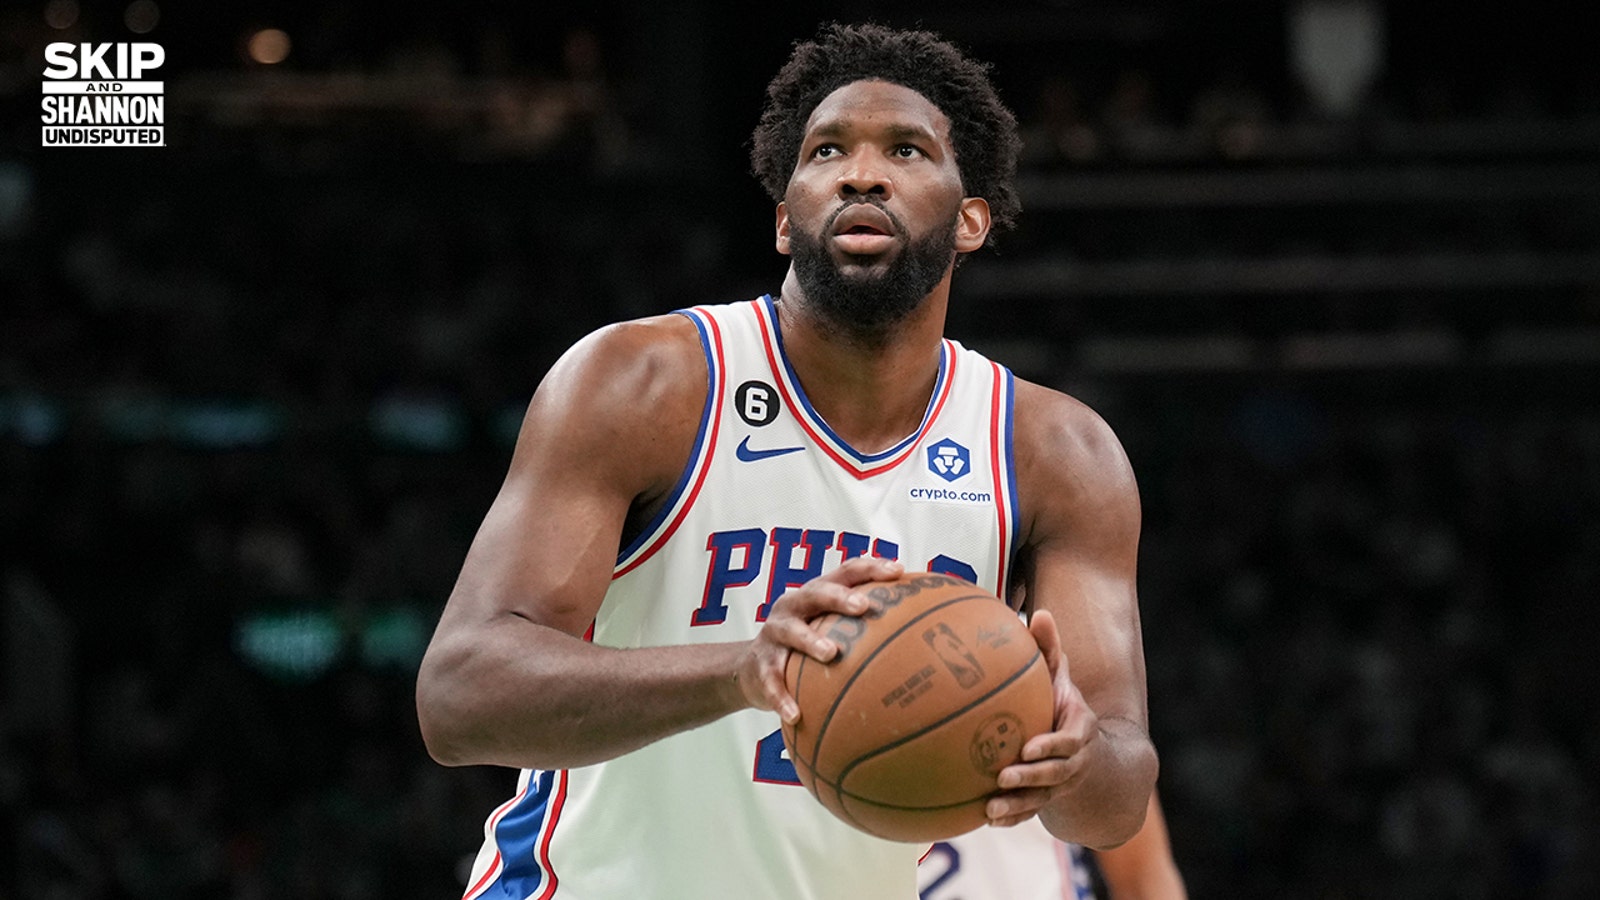 76ers blowout Celtics in Game 5 behind Embiid's 33-point performance